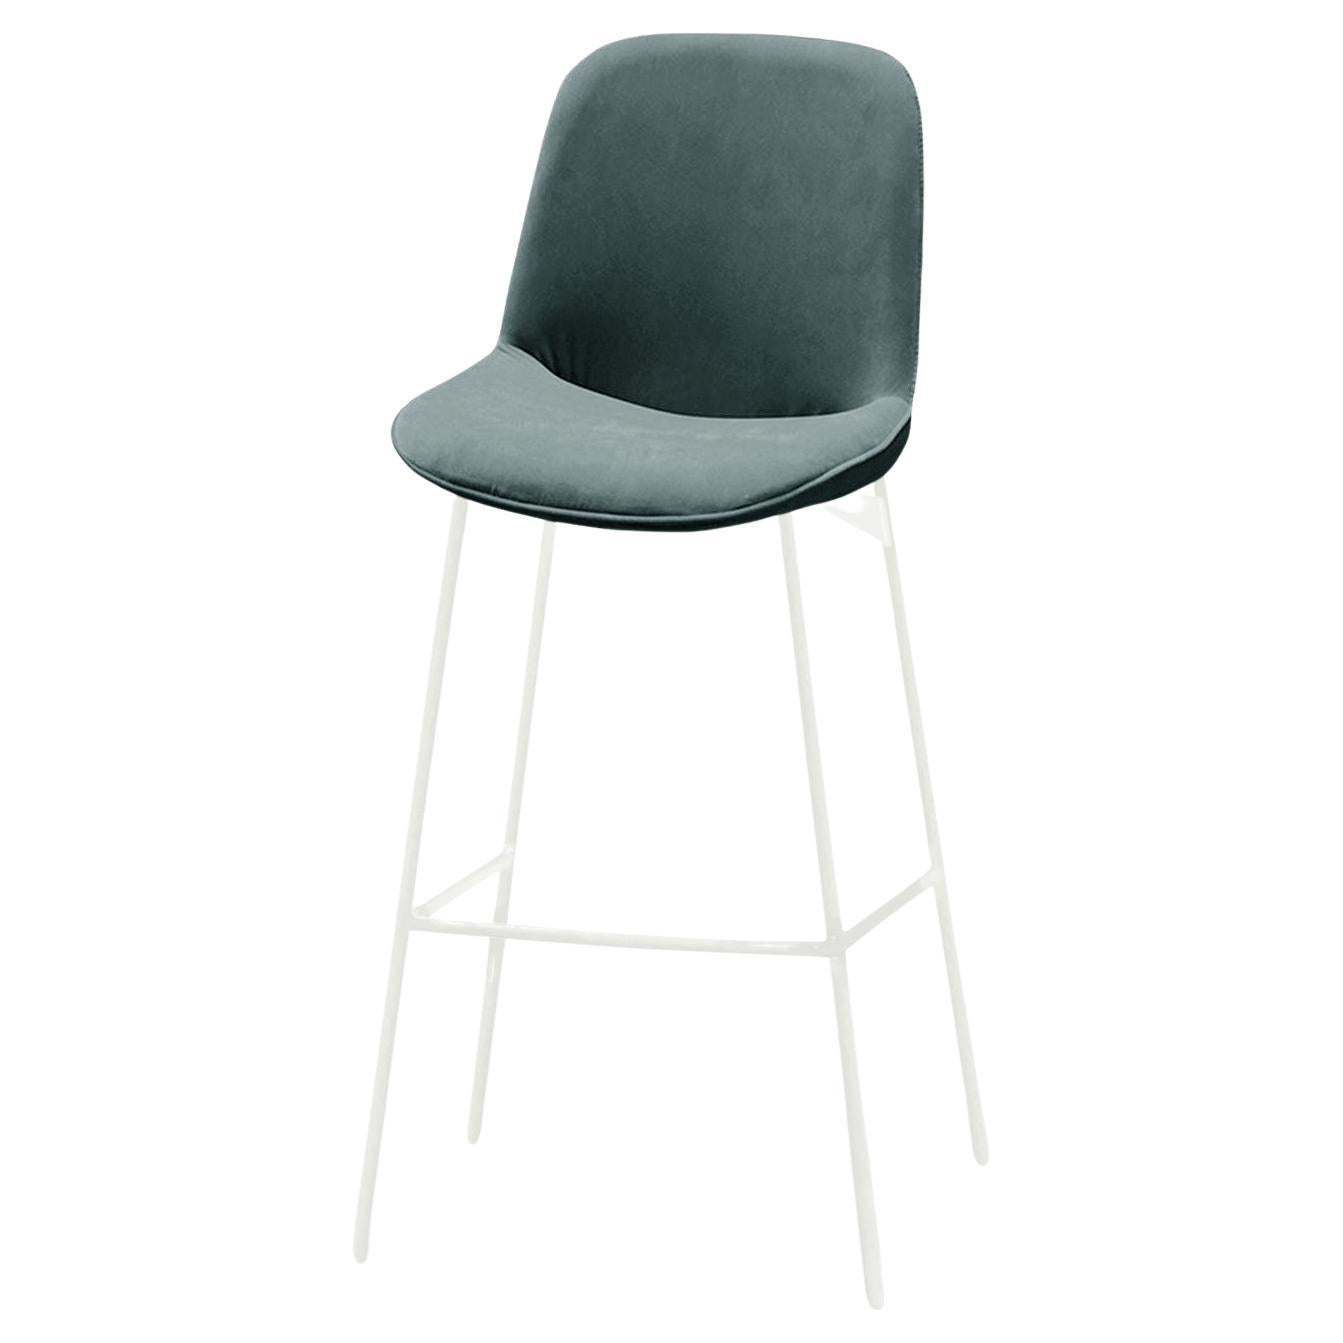 Chiado Bar Stool, Indigo Leather with Teal and White